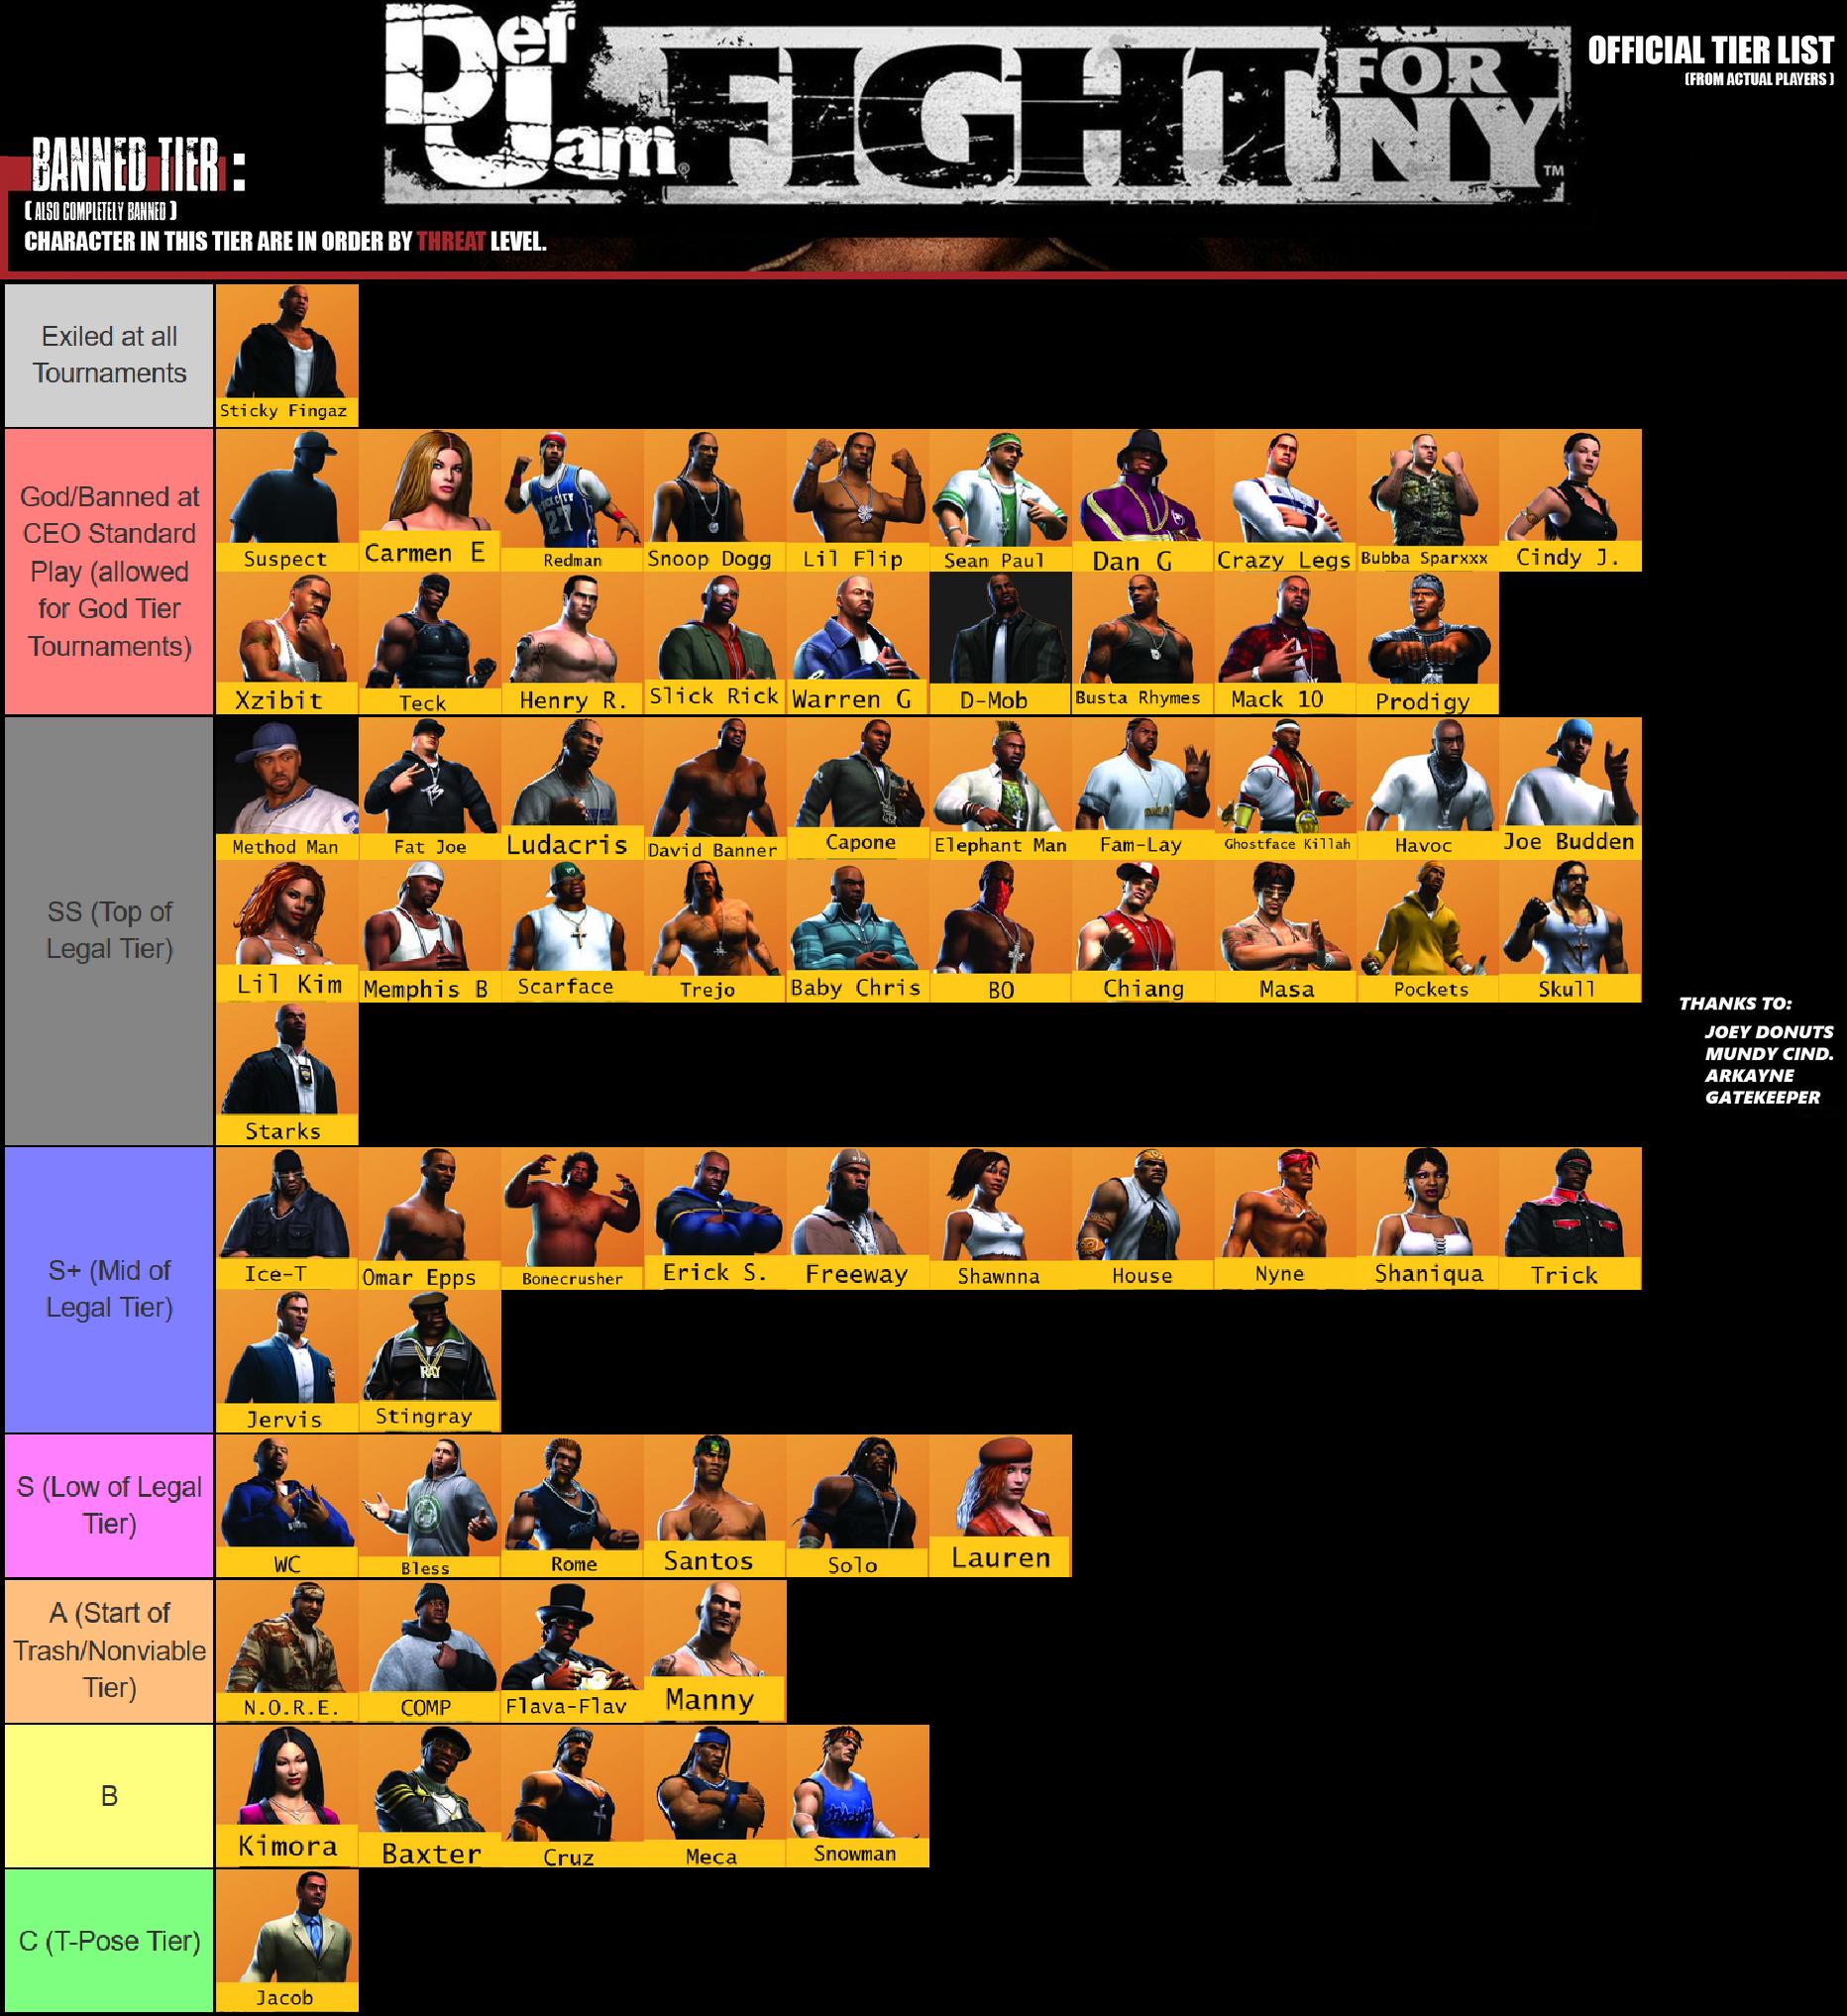  Def Jam Fight for NY : Everything Else